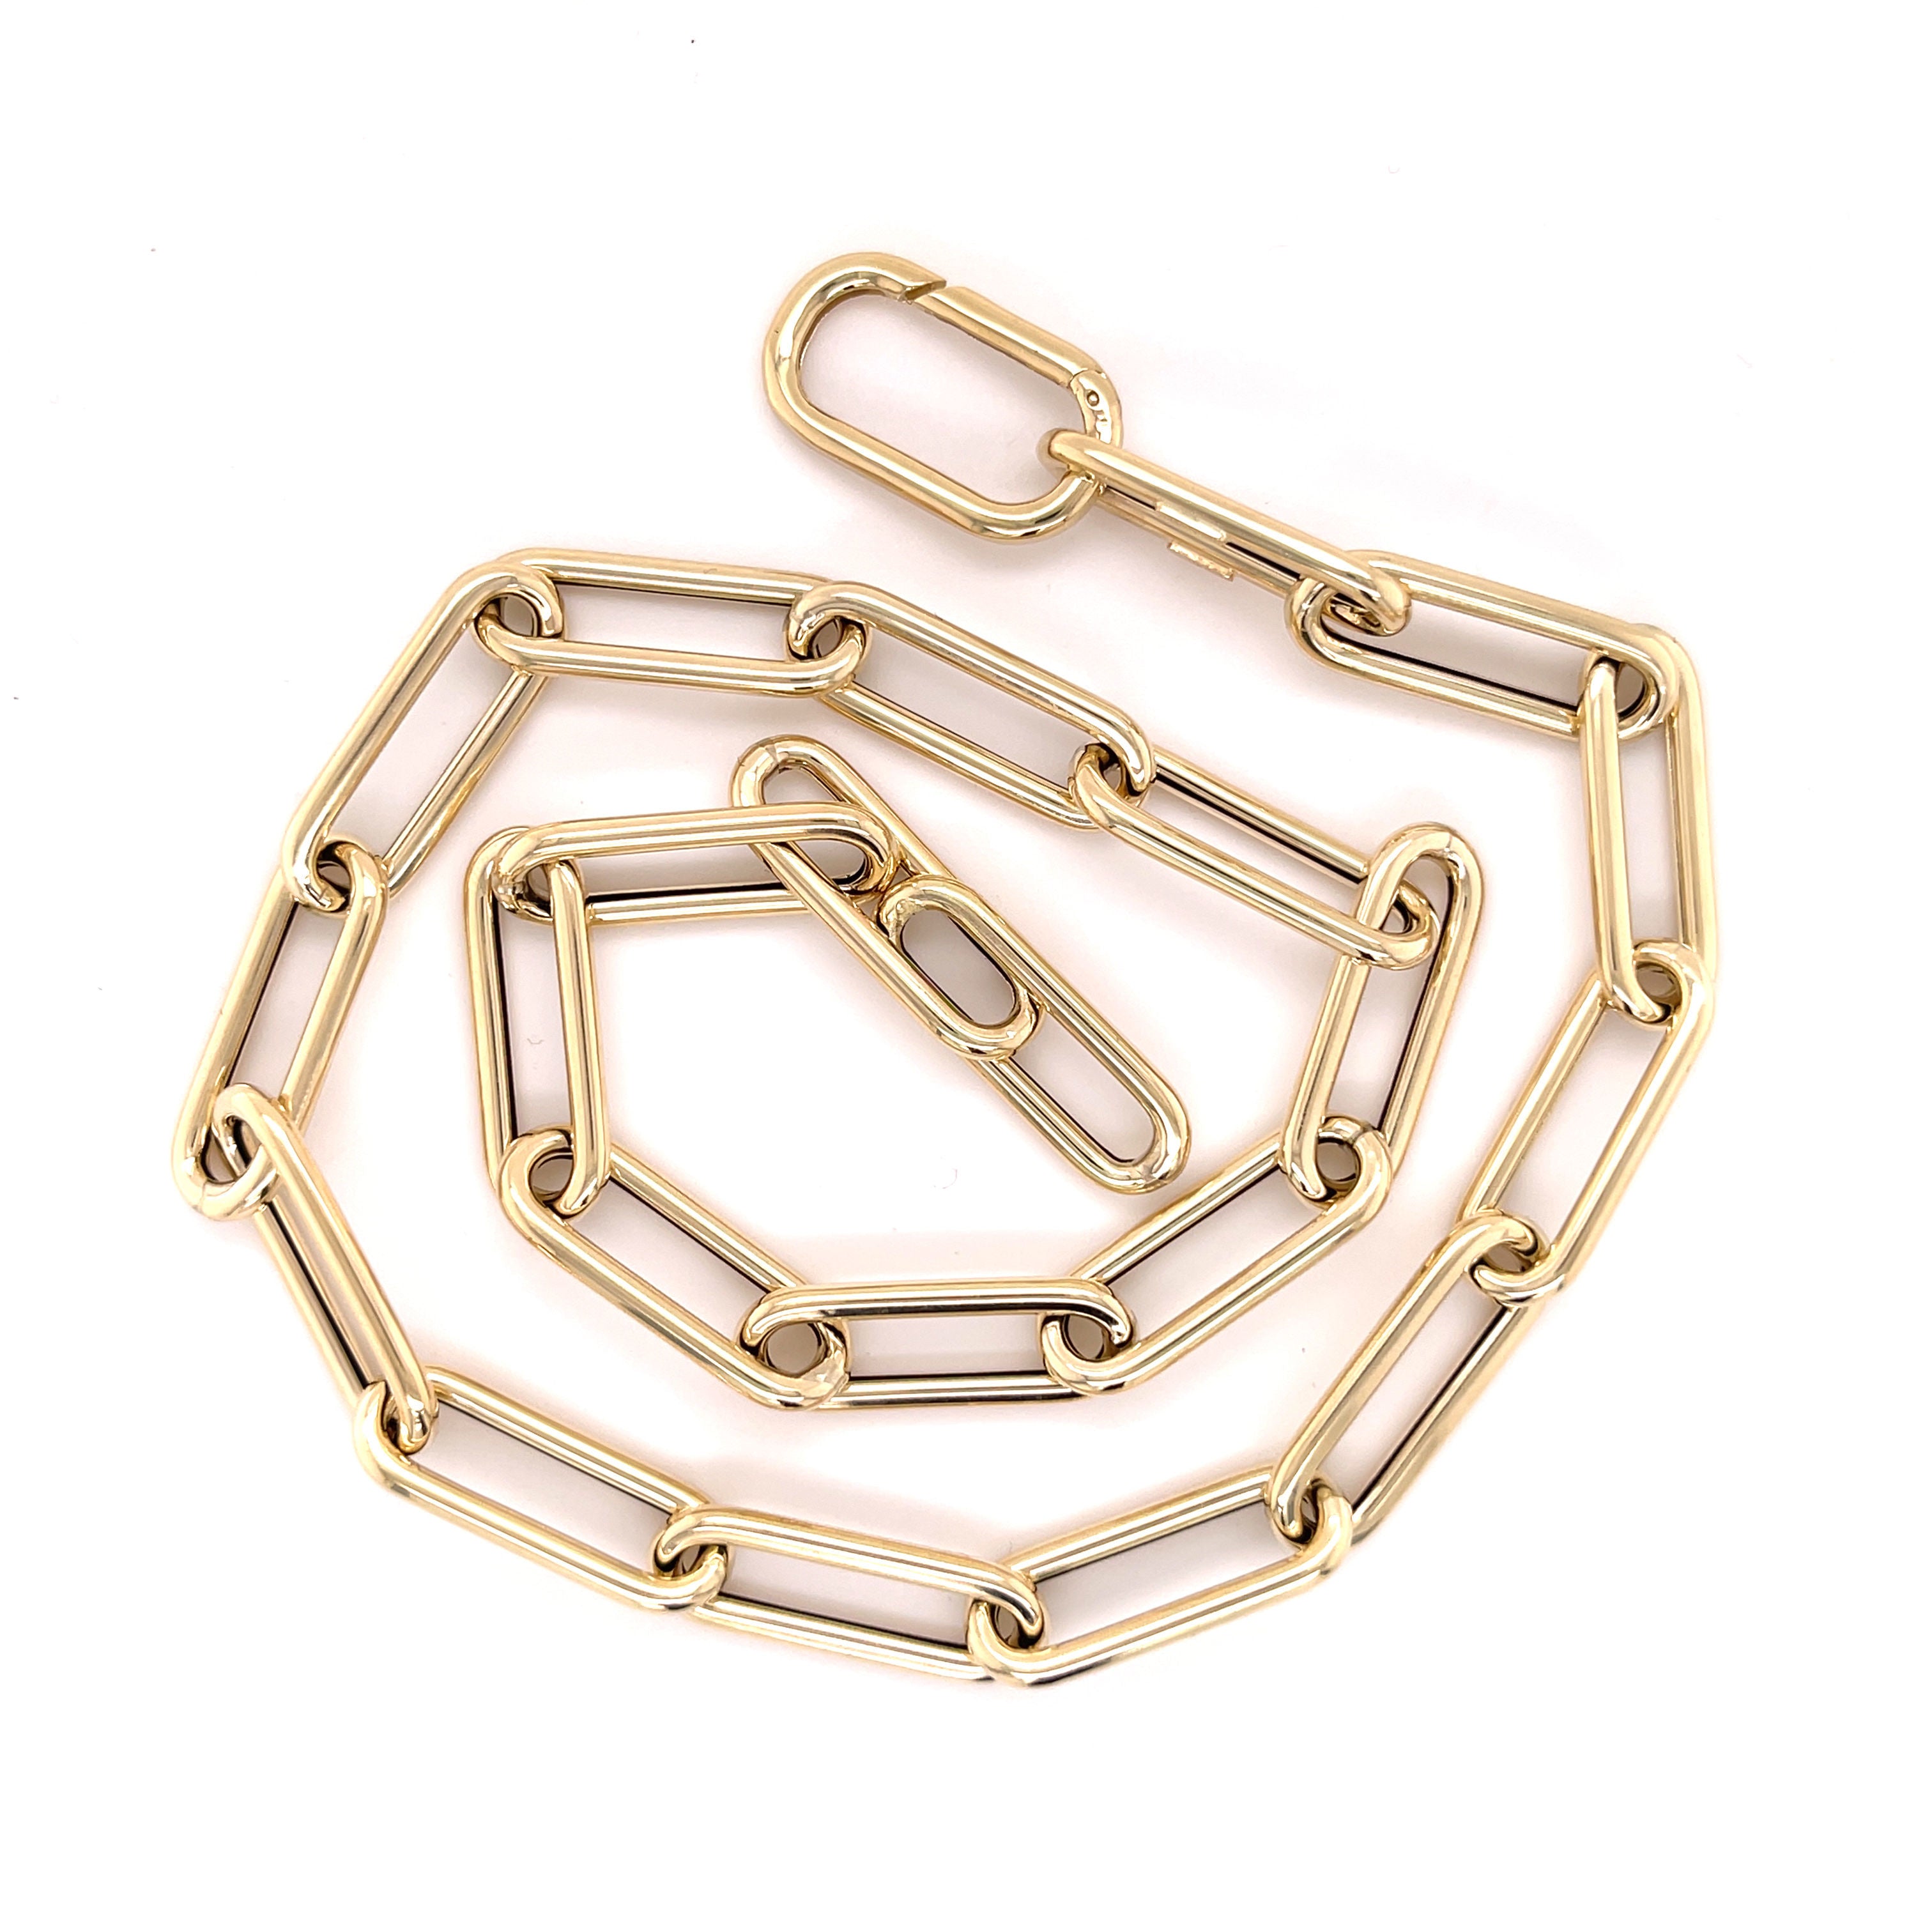 Gold Paperclip Chain Link Necklace - Blue Carabiner – Love You More Designs